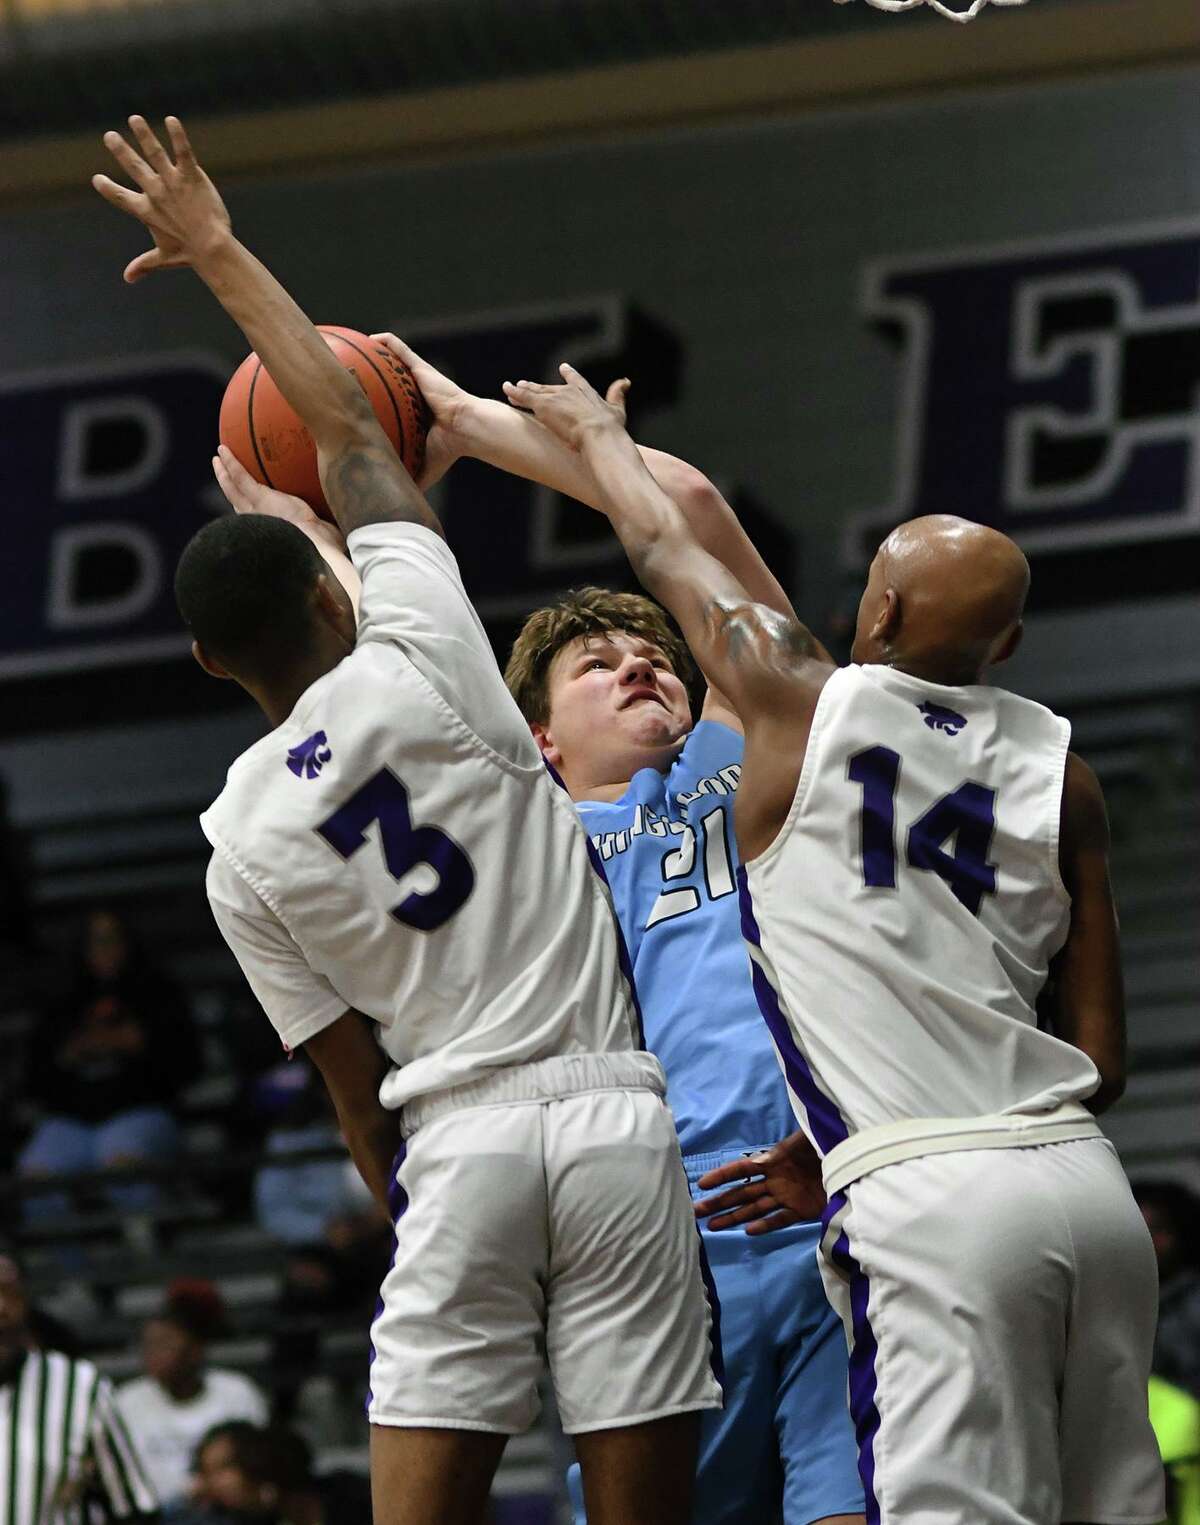 Kingwood senior Nick Neuman (21) gets a double dose of defense from Humble seniors Treymayne Toliver (3) and Tristen Charles (14) on a play late in the second quarter of their District 22-6A matchup at Humble High School on Jan. 7, 2020.